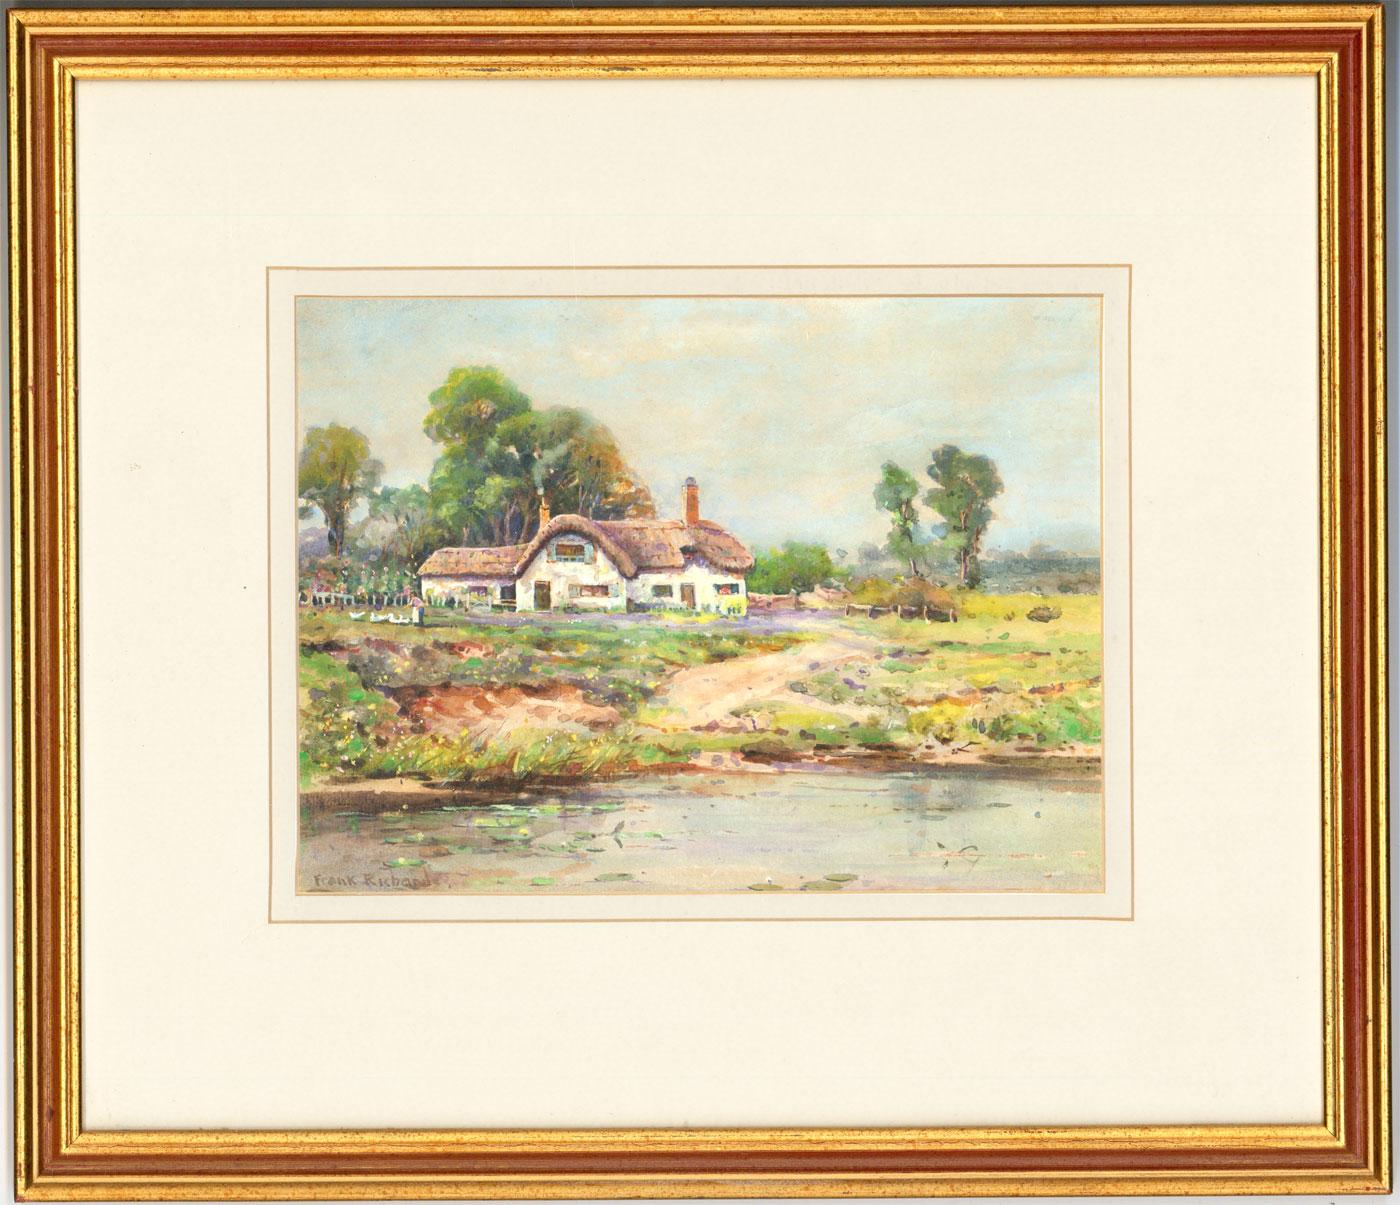 A fine watercolour painting with gum Arabic that makes the sky appear slightly 'sparkly'. Presented in a double card mount and gilt frame. Painted by the listed artist Frank Richards. Signed. On wove.